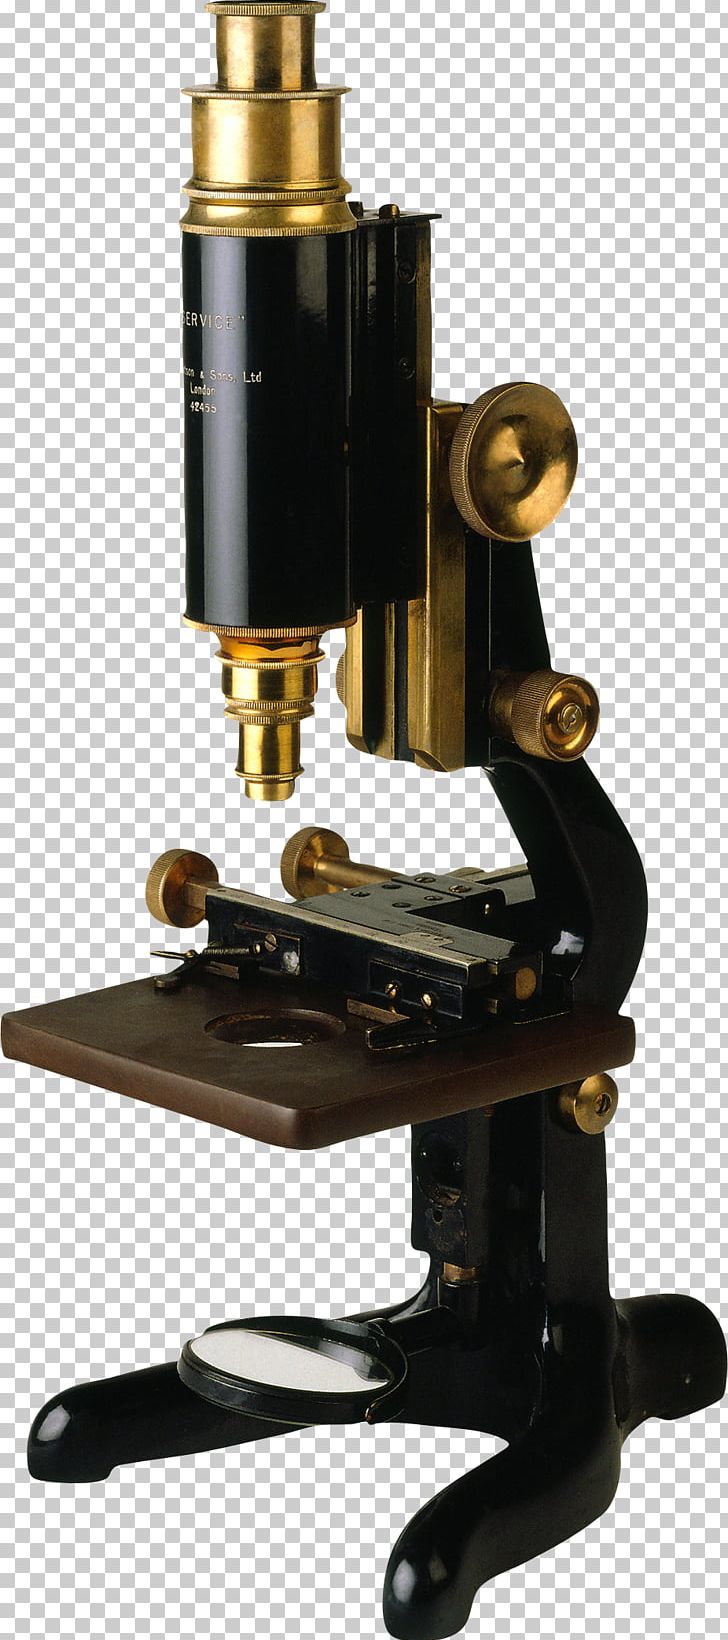 Microscope Binoculars Echipament De Laborator PNG, Clipart, Binoculars, Echipament De Laborator, Electrical Cable, Electronic Component, Electronics Free PNG Download